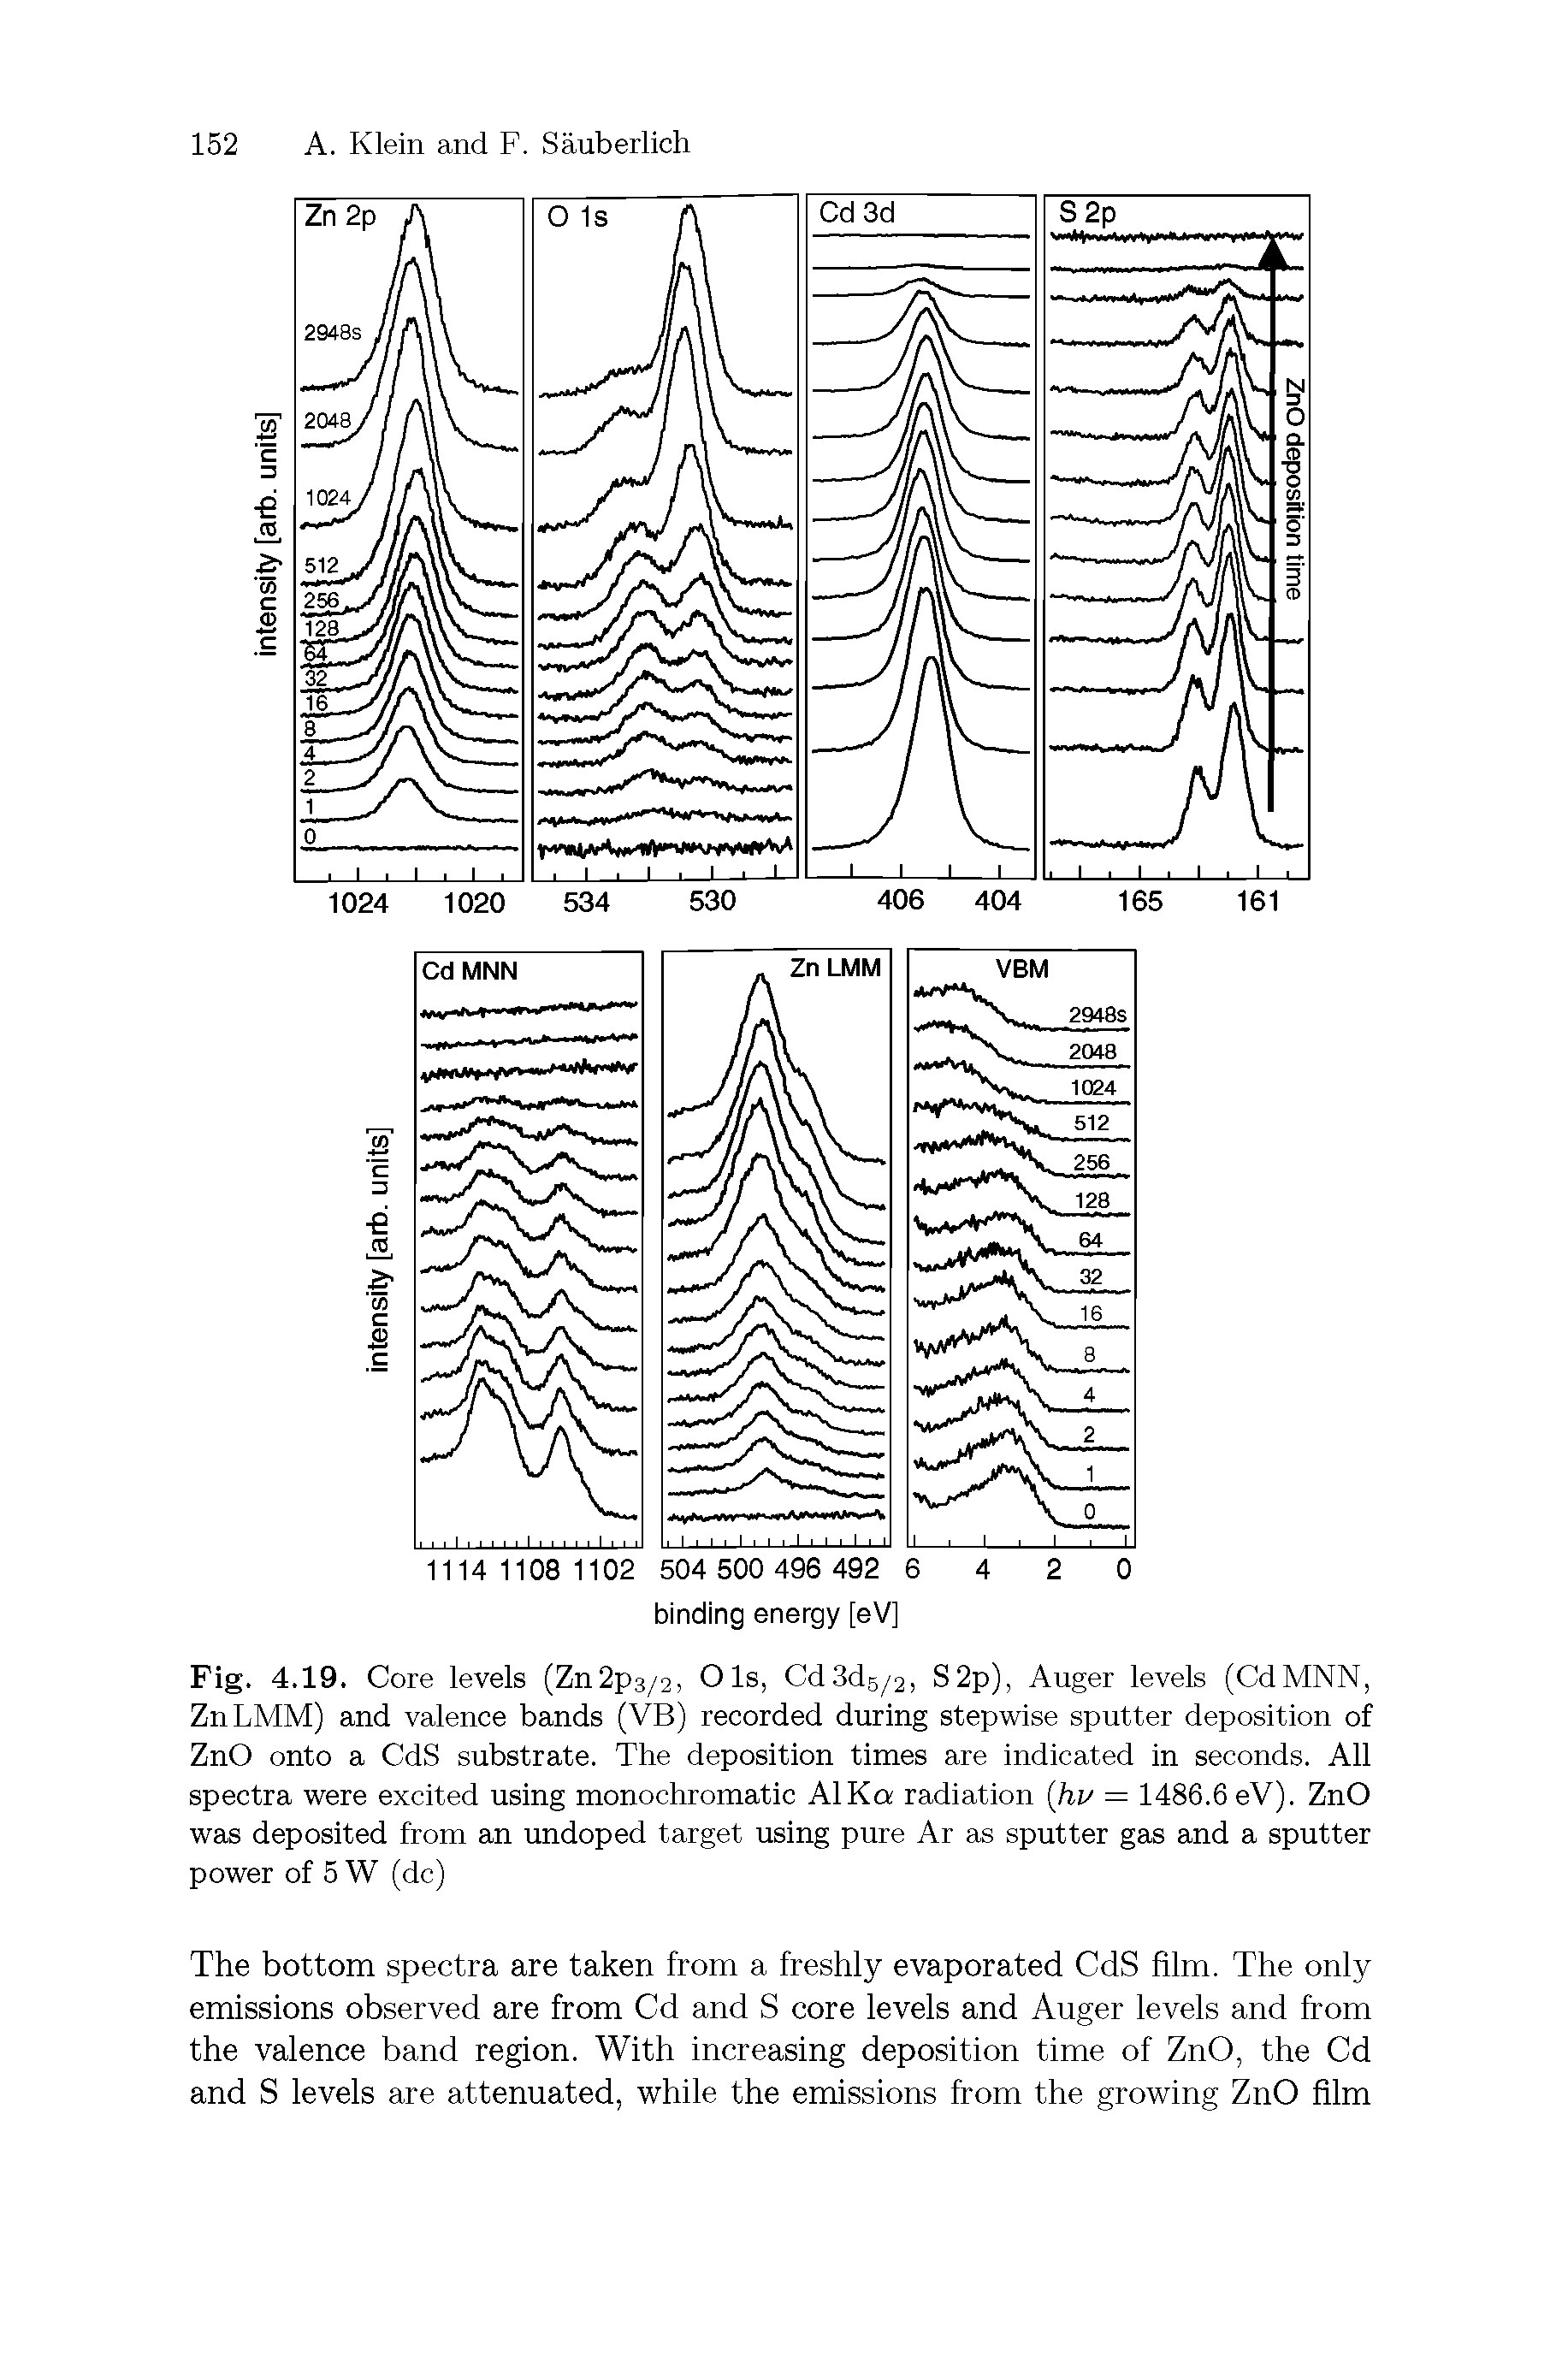 Fig. 4.19. Core levels (Zn2p3/2, Ols, Cd3dB/2, S2p), Auger levels (CdMNN, ZnLMM) and valence bands (VB) recorded during stepwise sputter deposition of ZnO onto a CdS substrate. The deposition times are indicated in seconds. All spectra were excited using monochromatic AlKcr radiation (hu = 1486.6 eV). ZnO was deposited from an undoped target using pure Ar as sputter gas and a sputter power of 5 W (dc)...